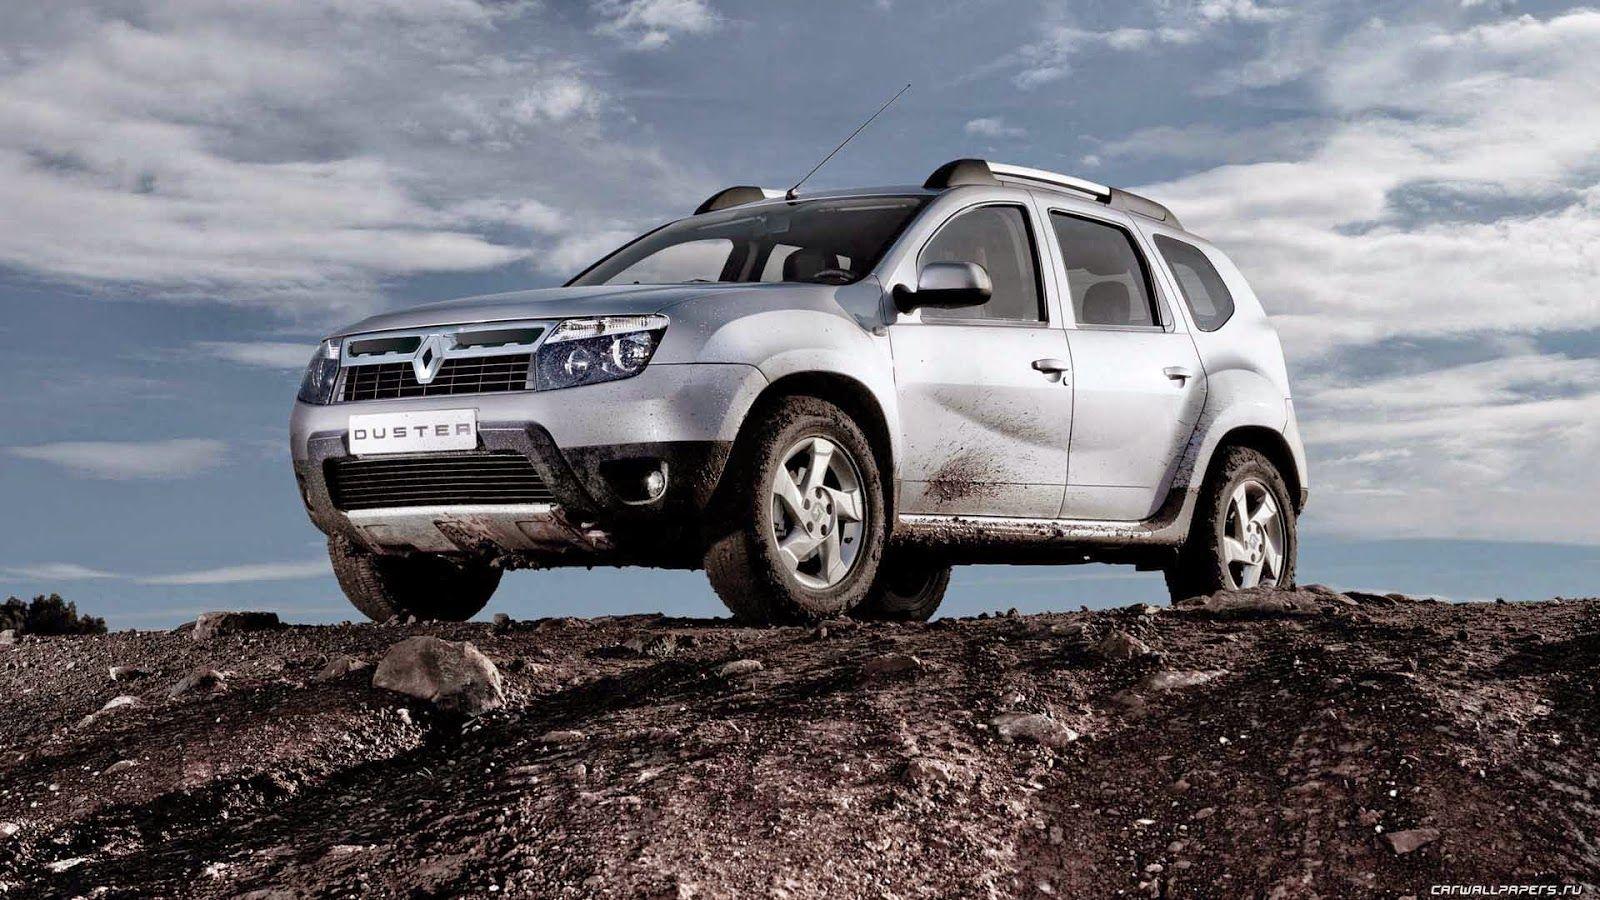 New Duster Car HD Wallpaper And Latest Models photo Latest